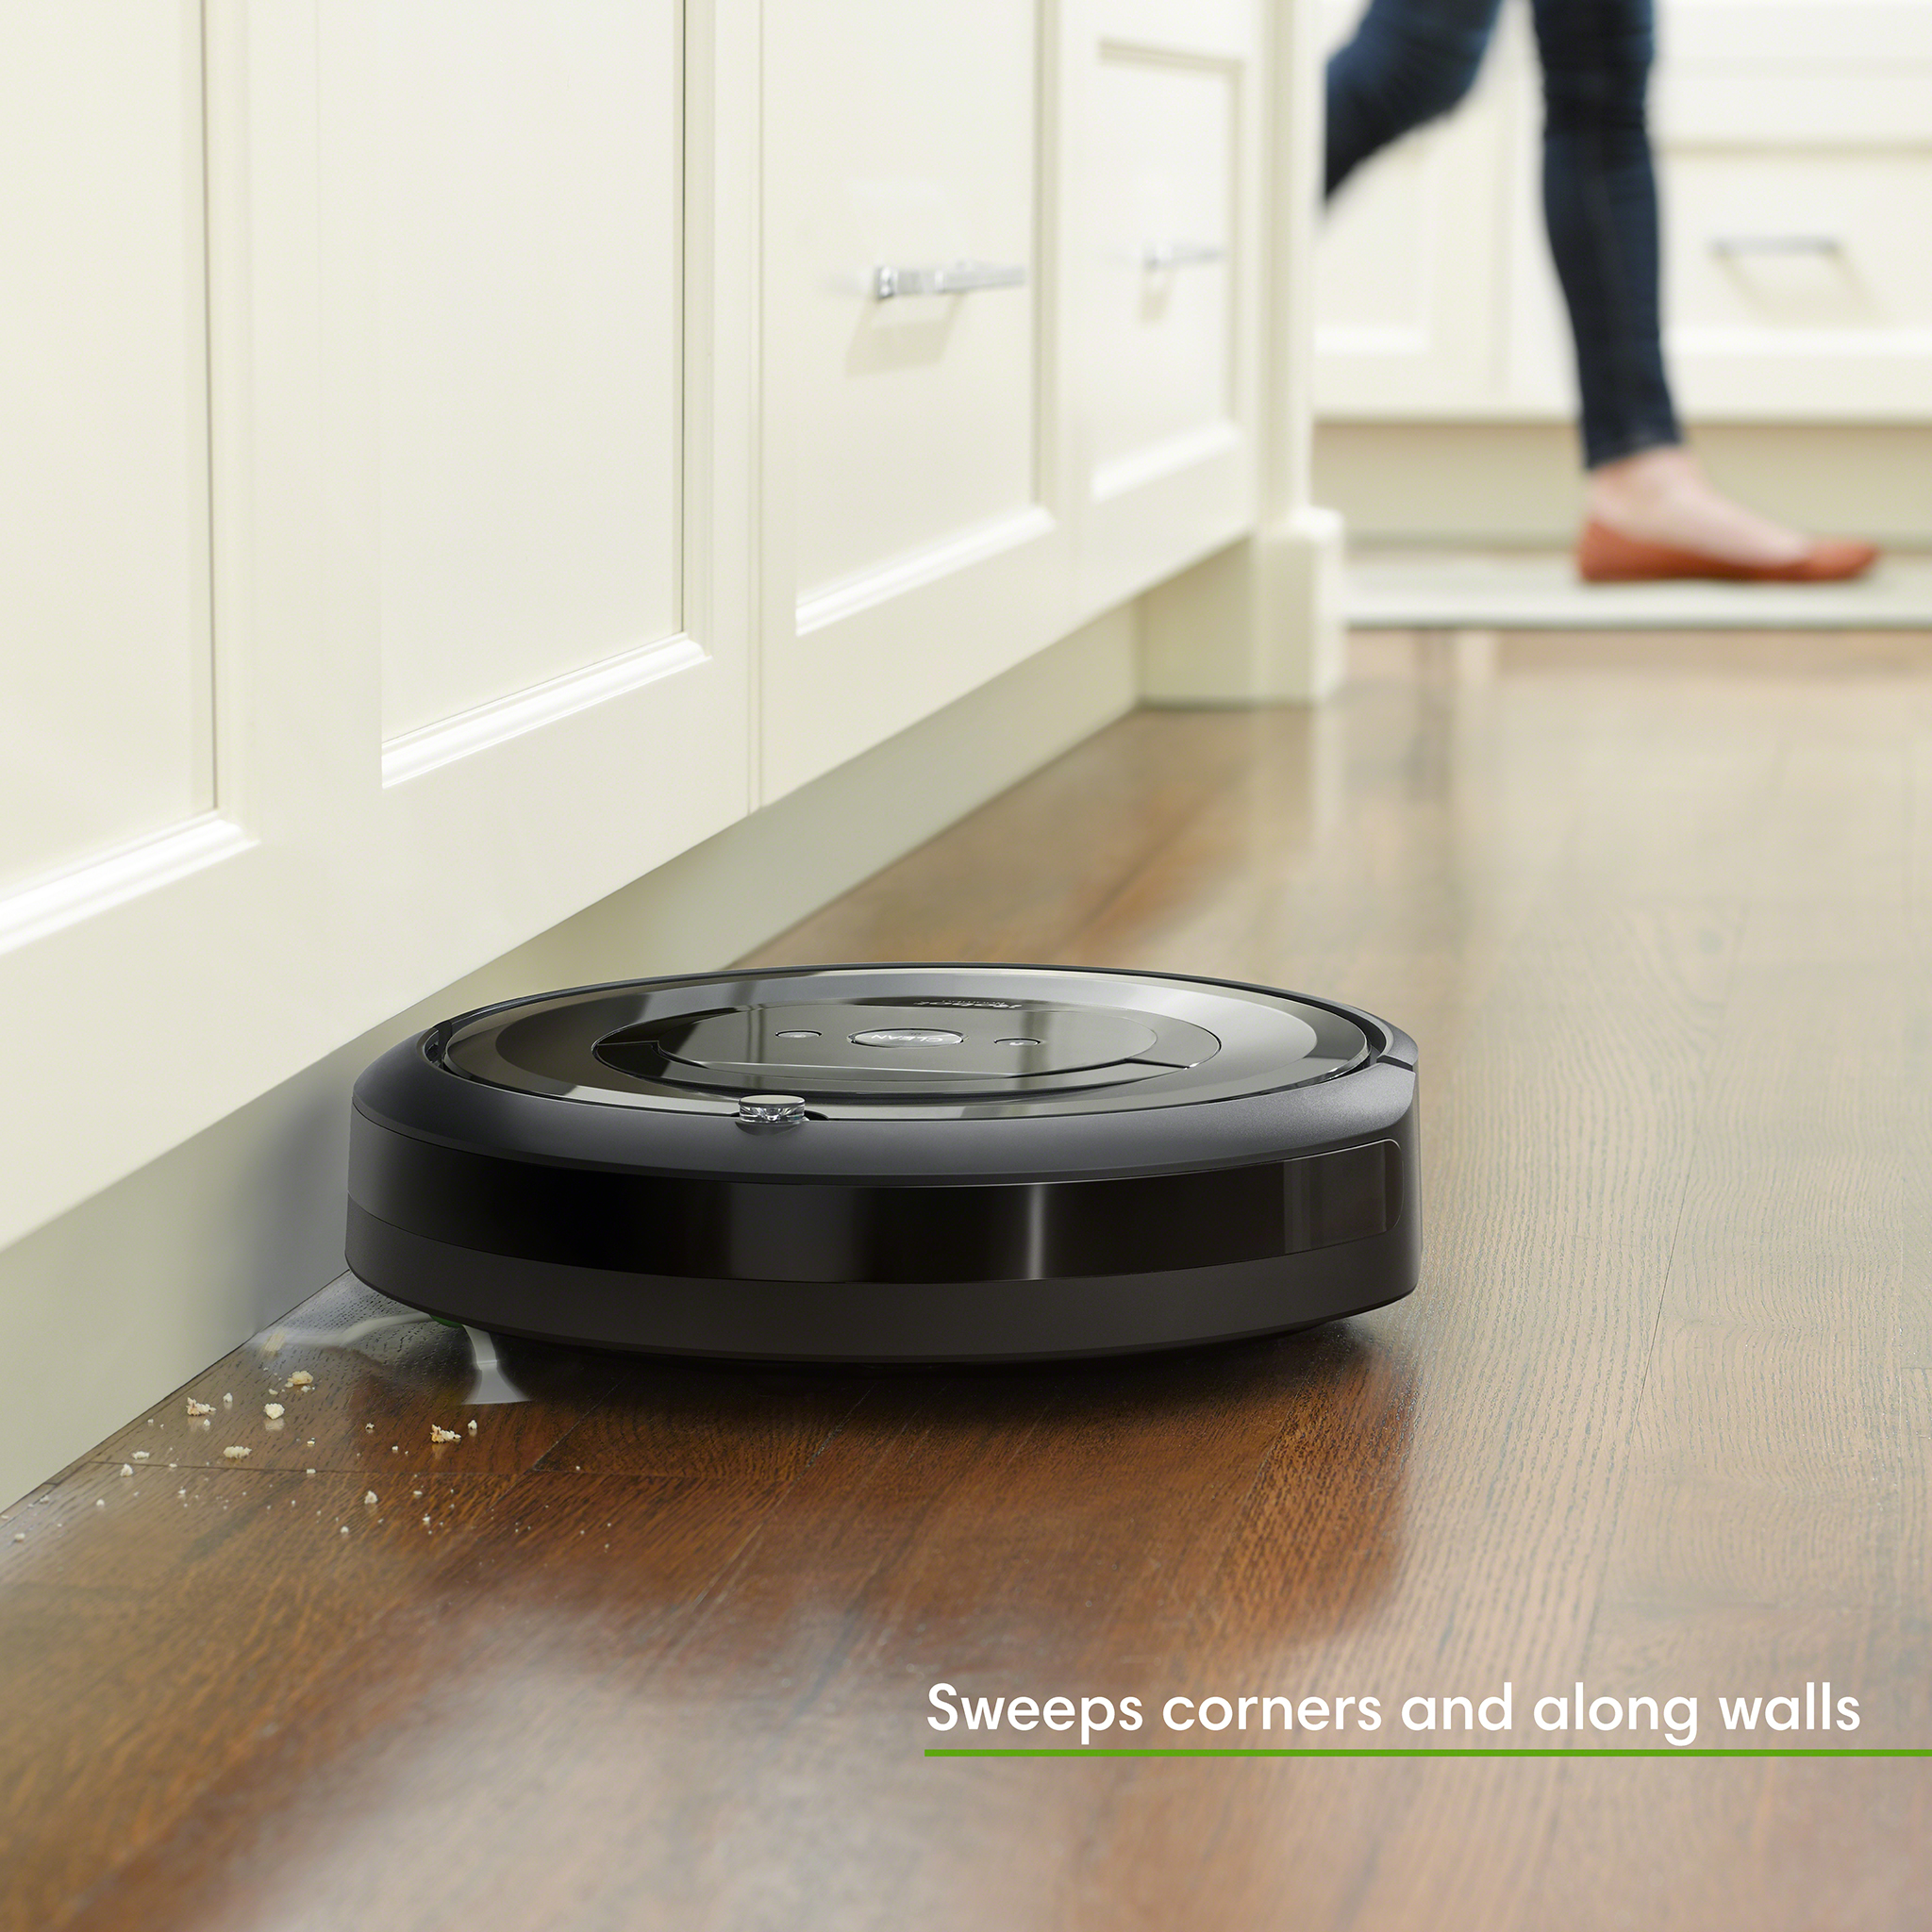 iRobot Roomba e6 (6134) Wi-Fi Connected Robot Vacuum - Wi-Fi Connected, Works with Google, Ideal for Pet Hair, Carpets, Hard, Self-Charging Robotic Vacuum - image 10 of 15